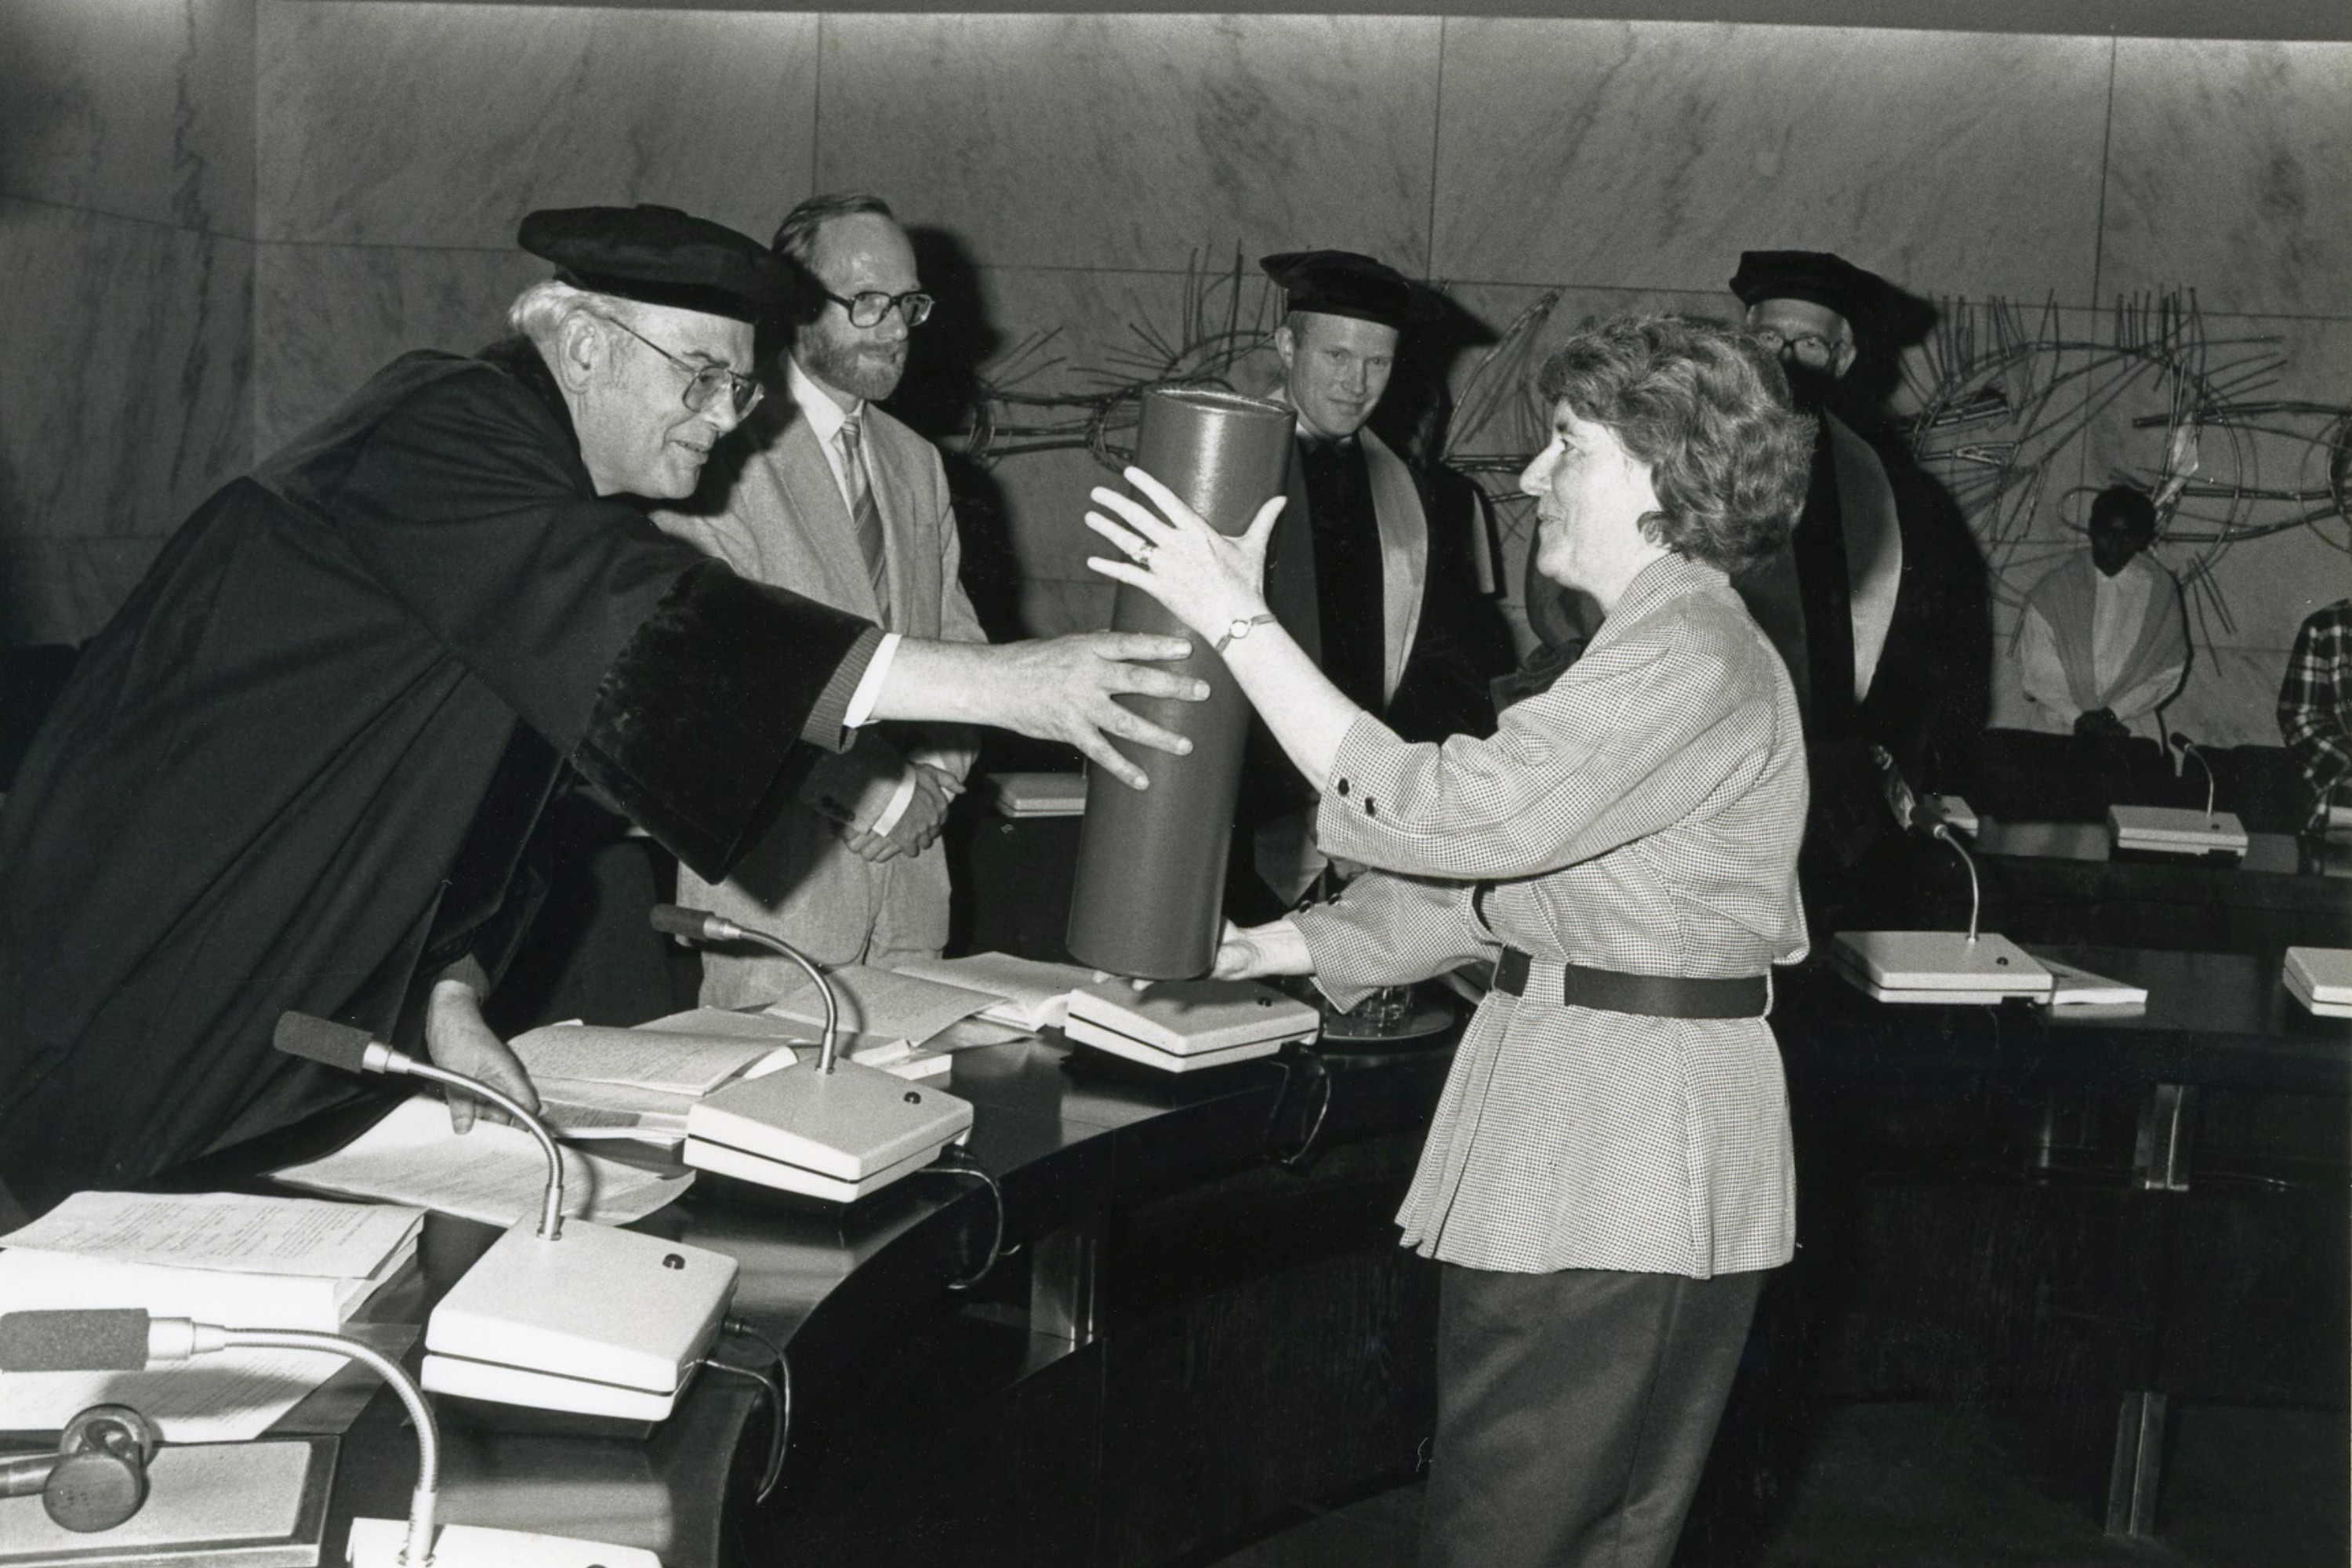 Black and white photo of Professor Frize exchanging a large cylindrical item with an academic wearing a gown